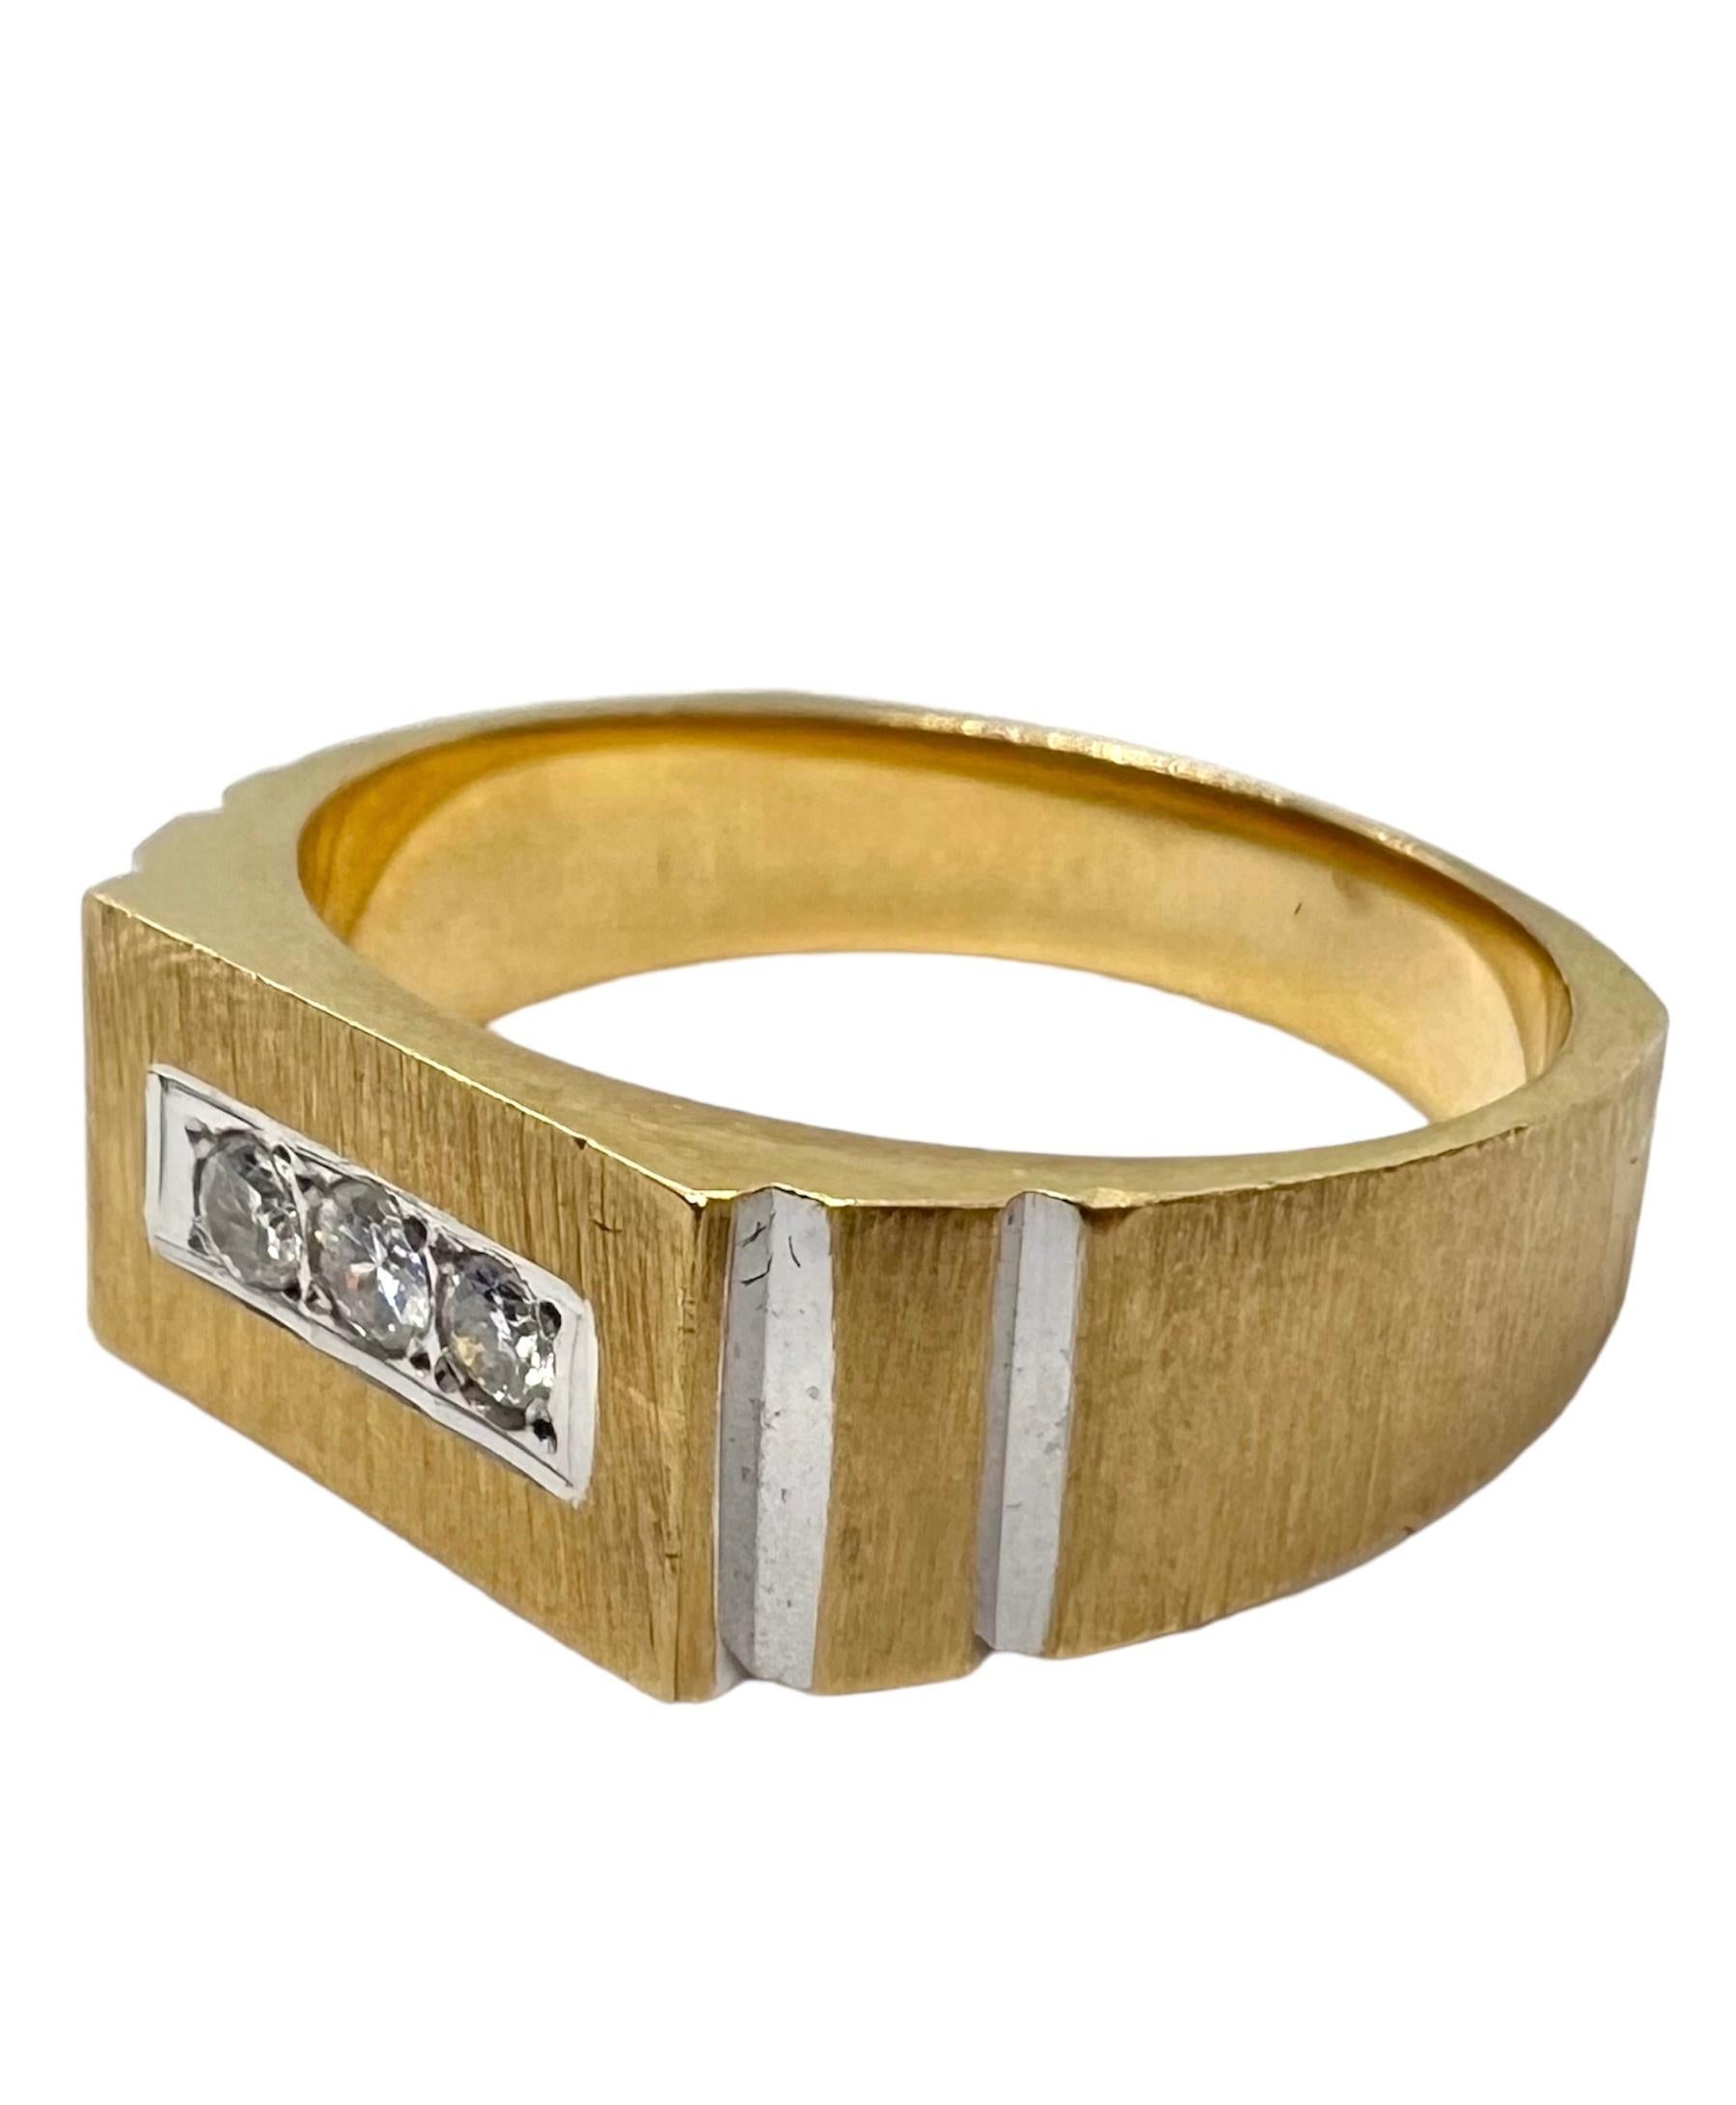 14K yellow gold signet ring with square cut diamonds.

Sophia D by Joseph Dardashti LTD has been known worldwide for 35 years and are inspired by classic Art Deco design that merges with modern manufacturing techniques.  